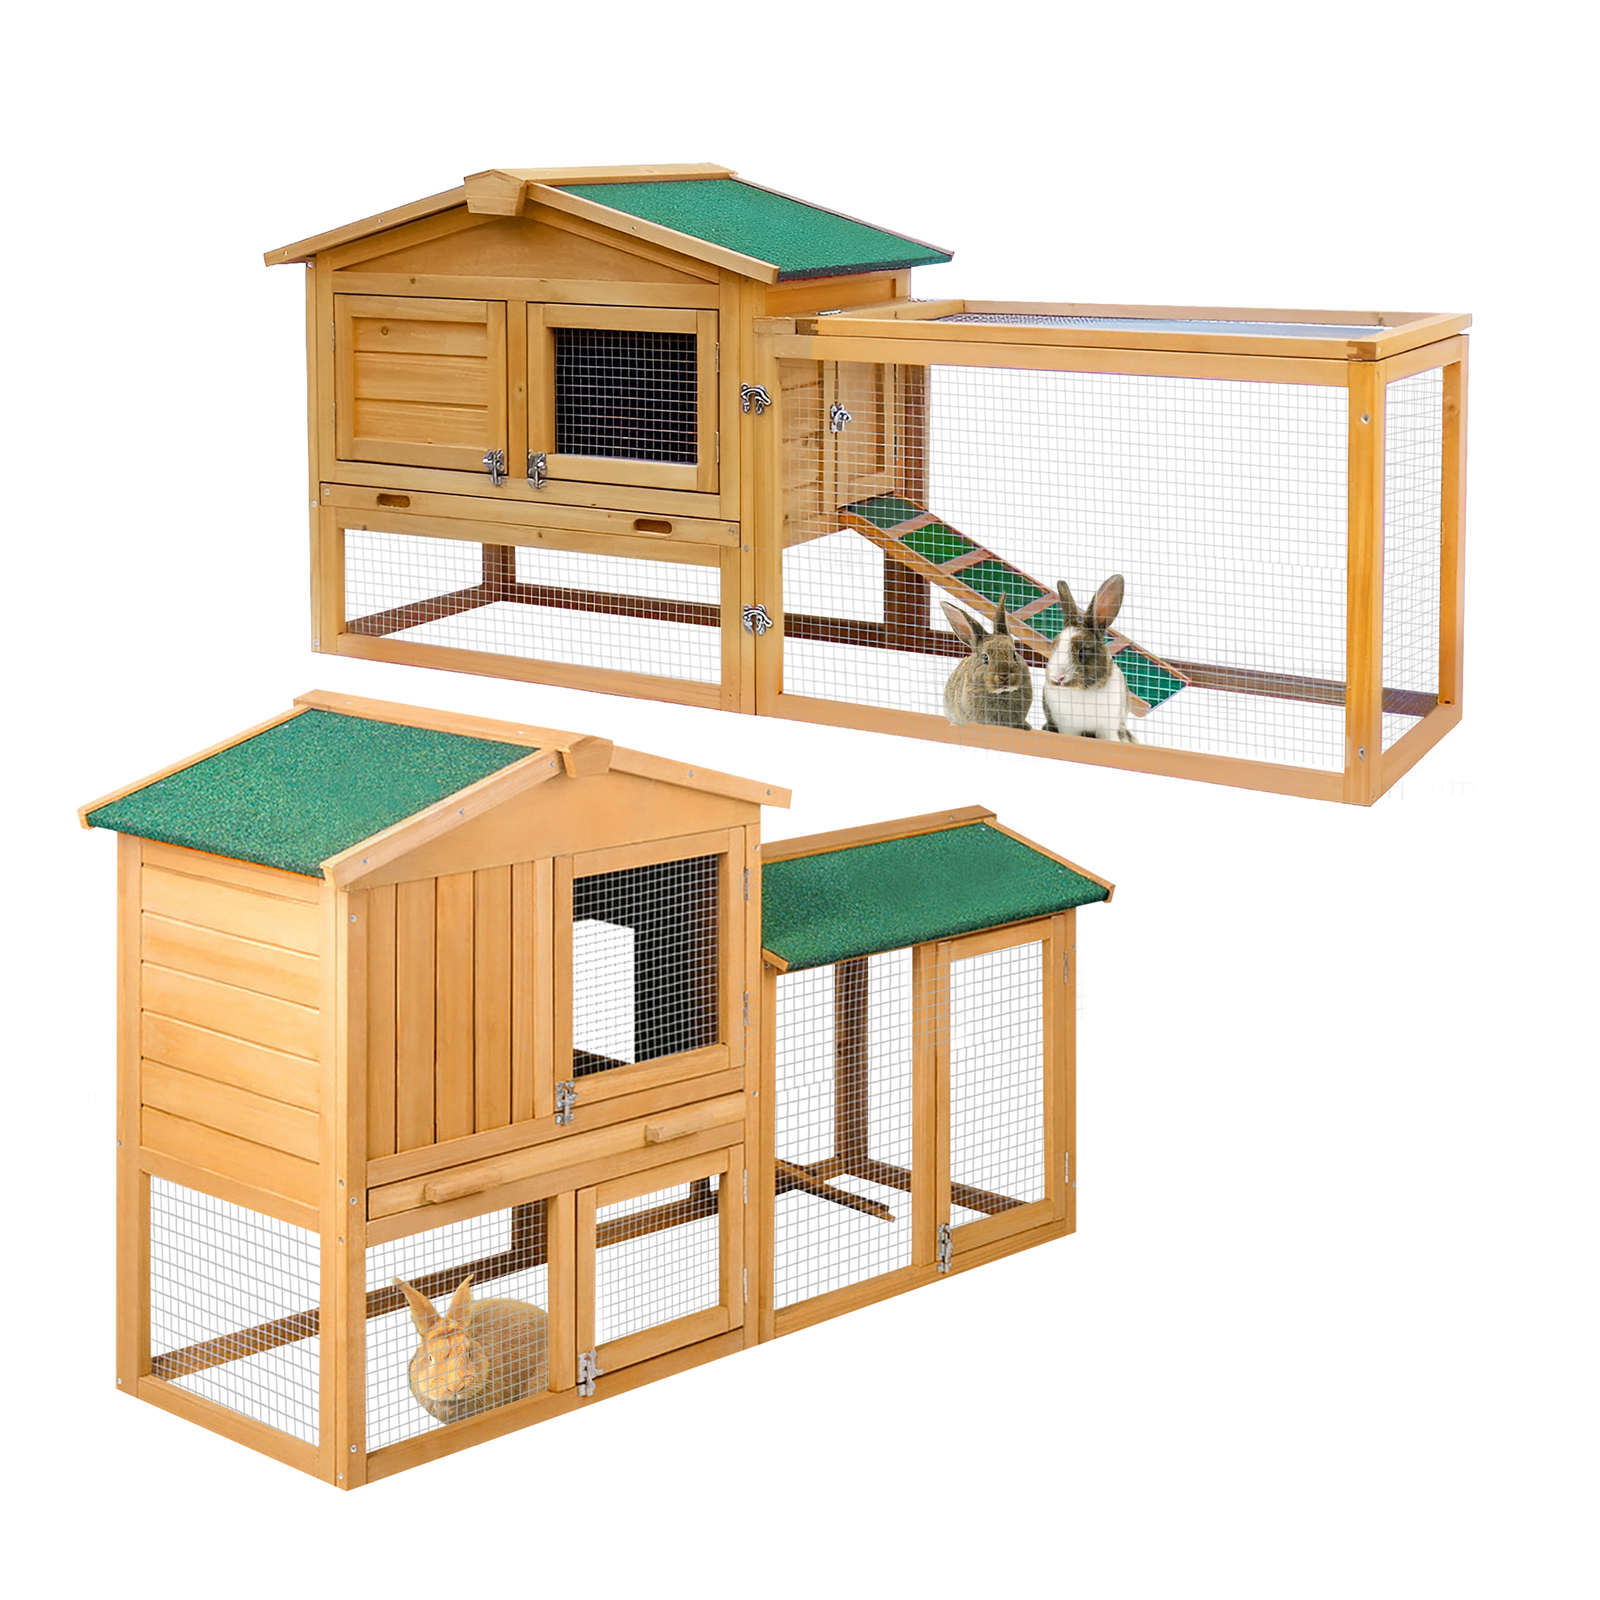 Chicken Coop Rabbit Hutch Large Wooden House Run Outdoor Farm Pet Cage